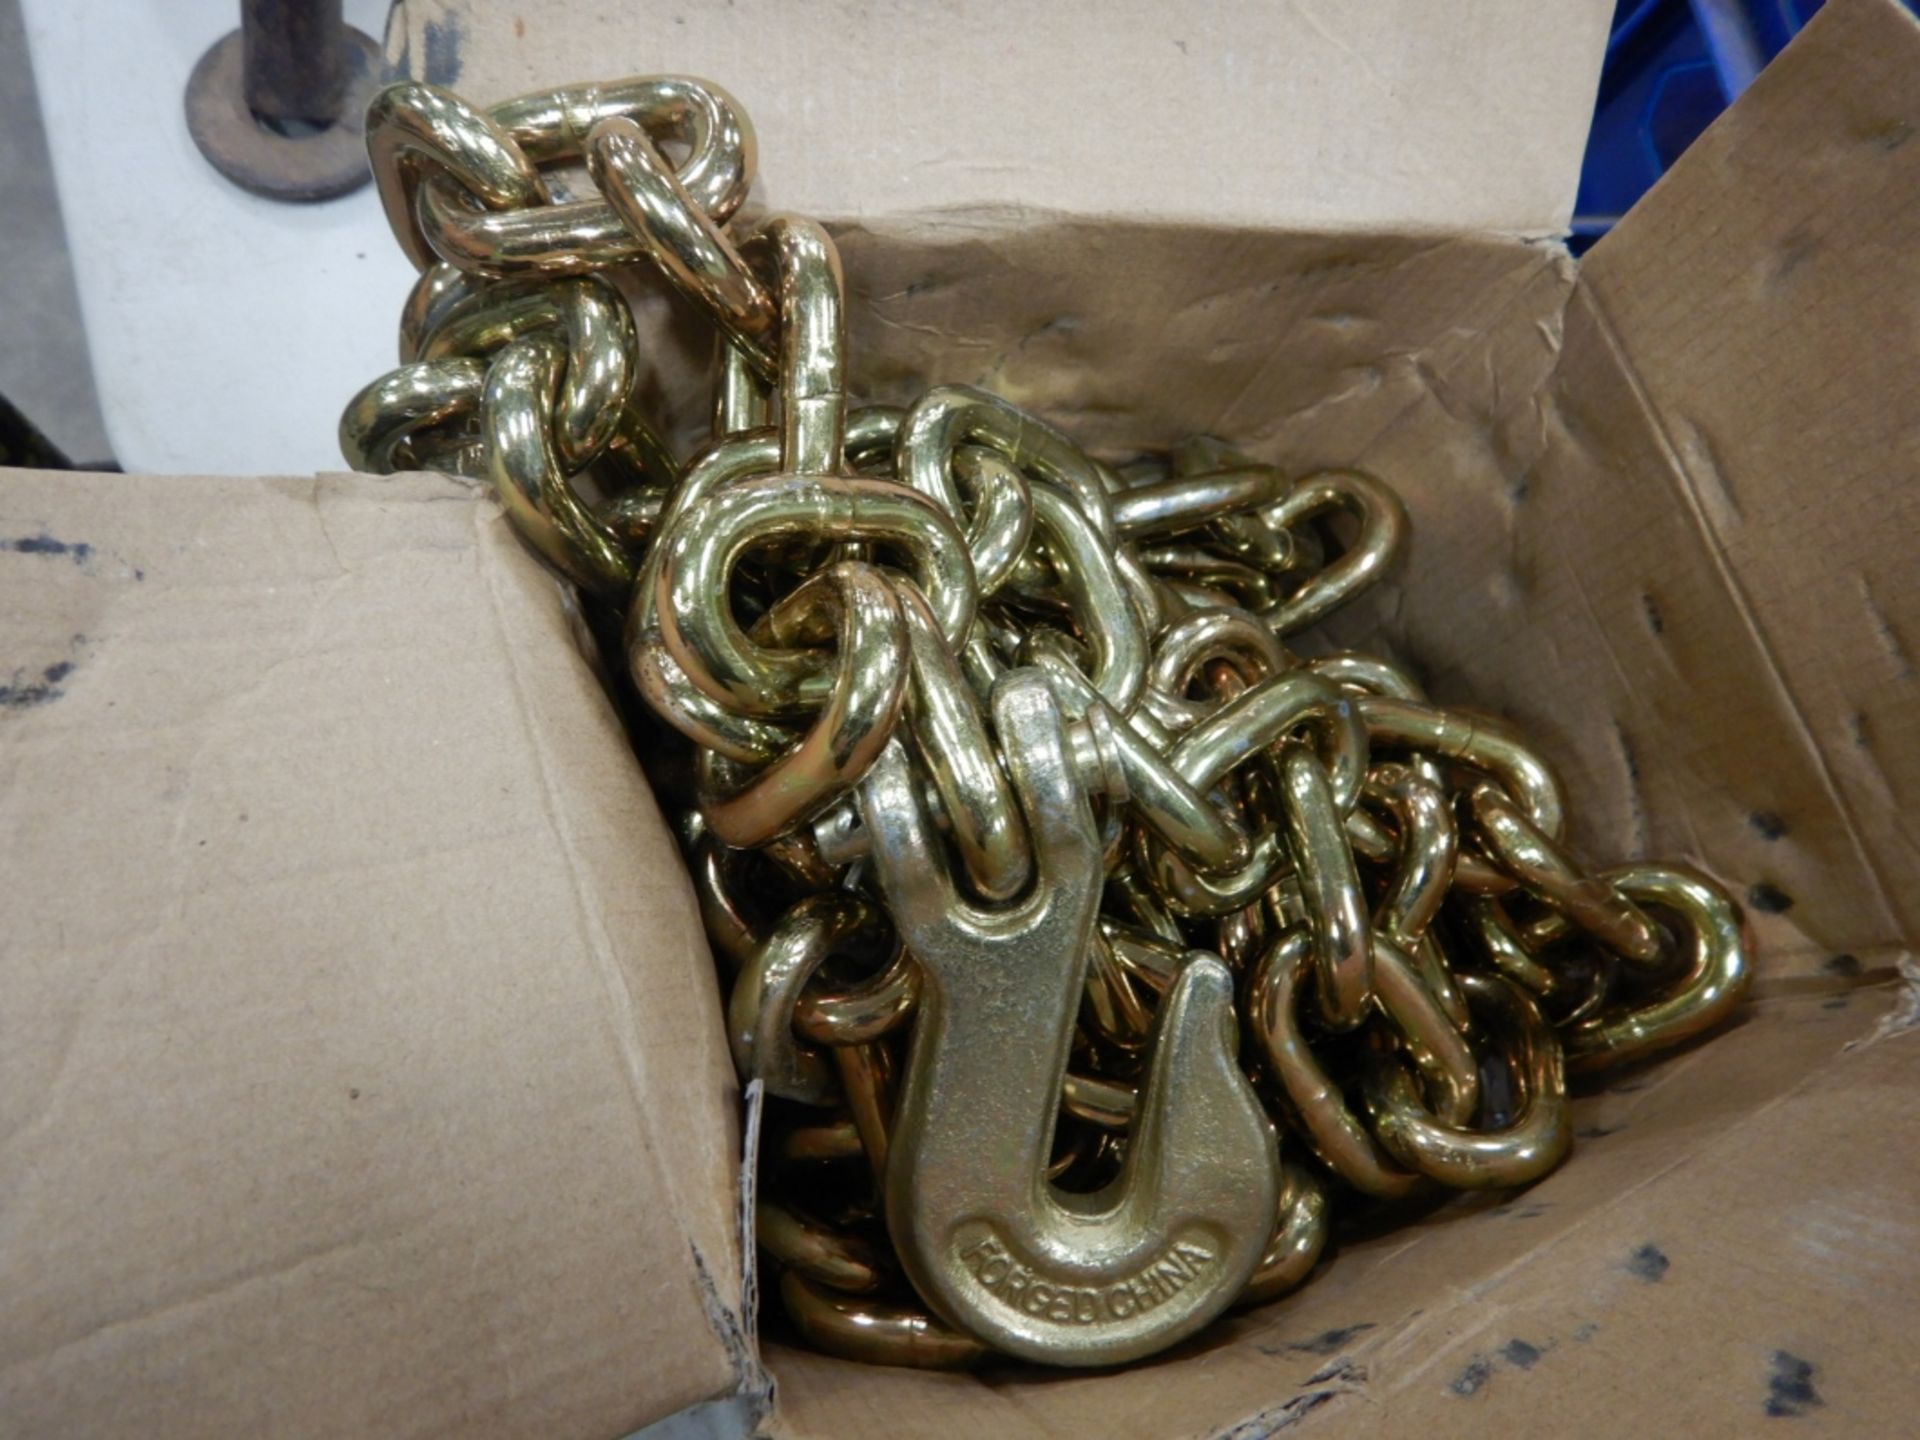 3/8X20FT SCHEDULE 70 CHAIN W/GRAB HOOKS - NEW IN BOX